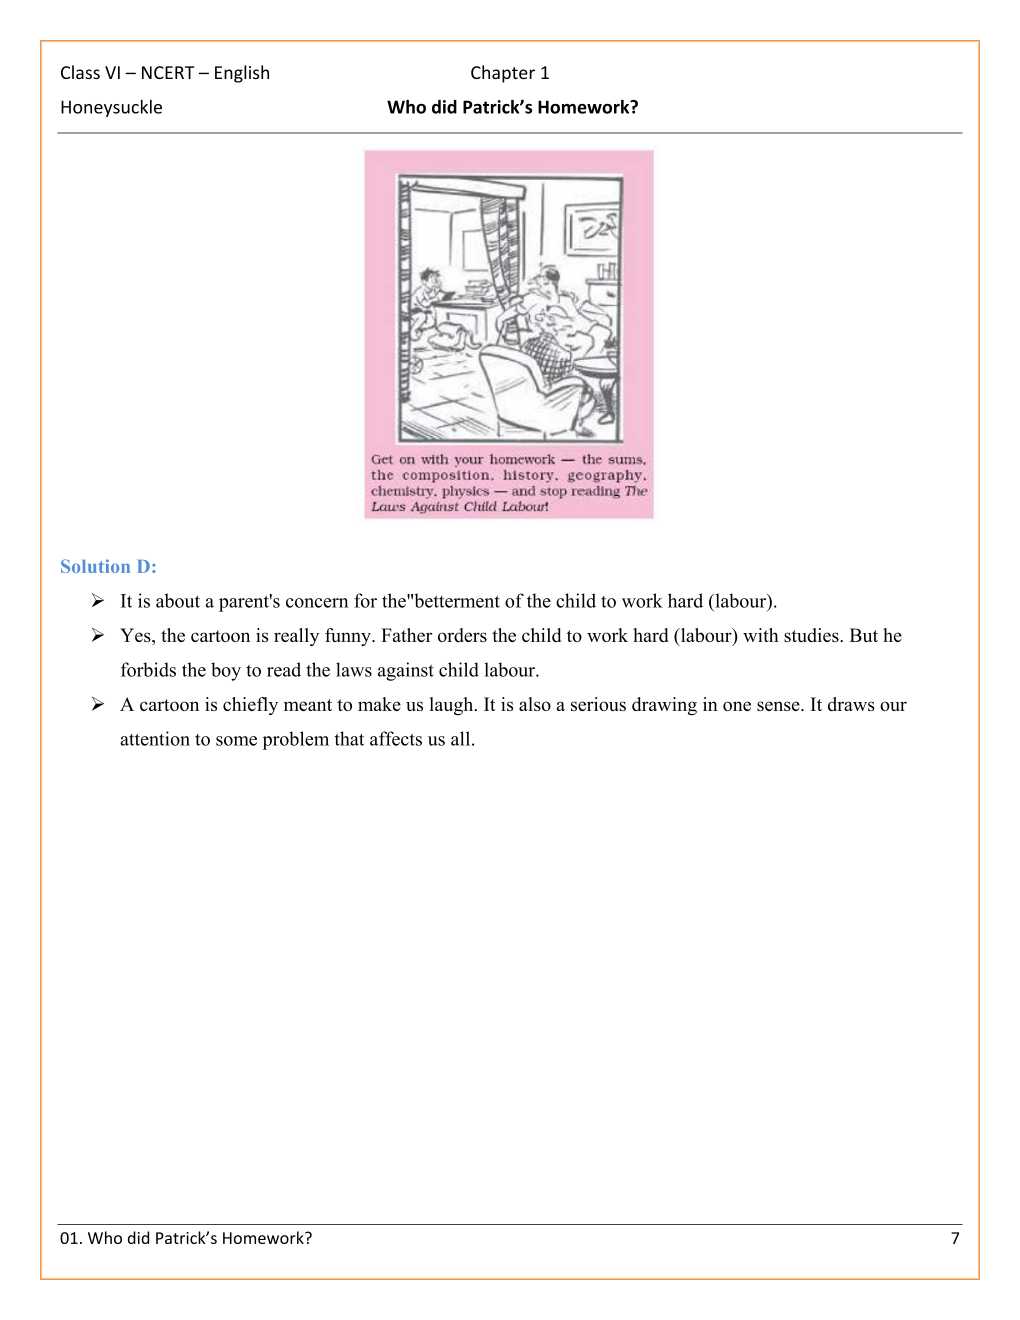 NCERT Solutions For Class 6 English Honeysuckle Chapter 1